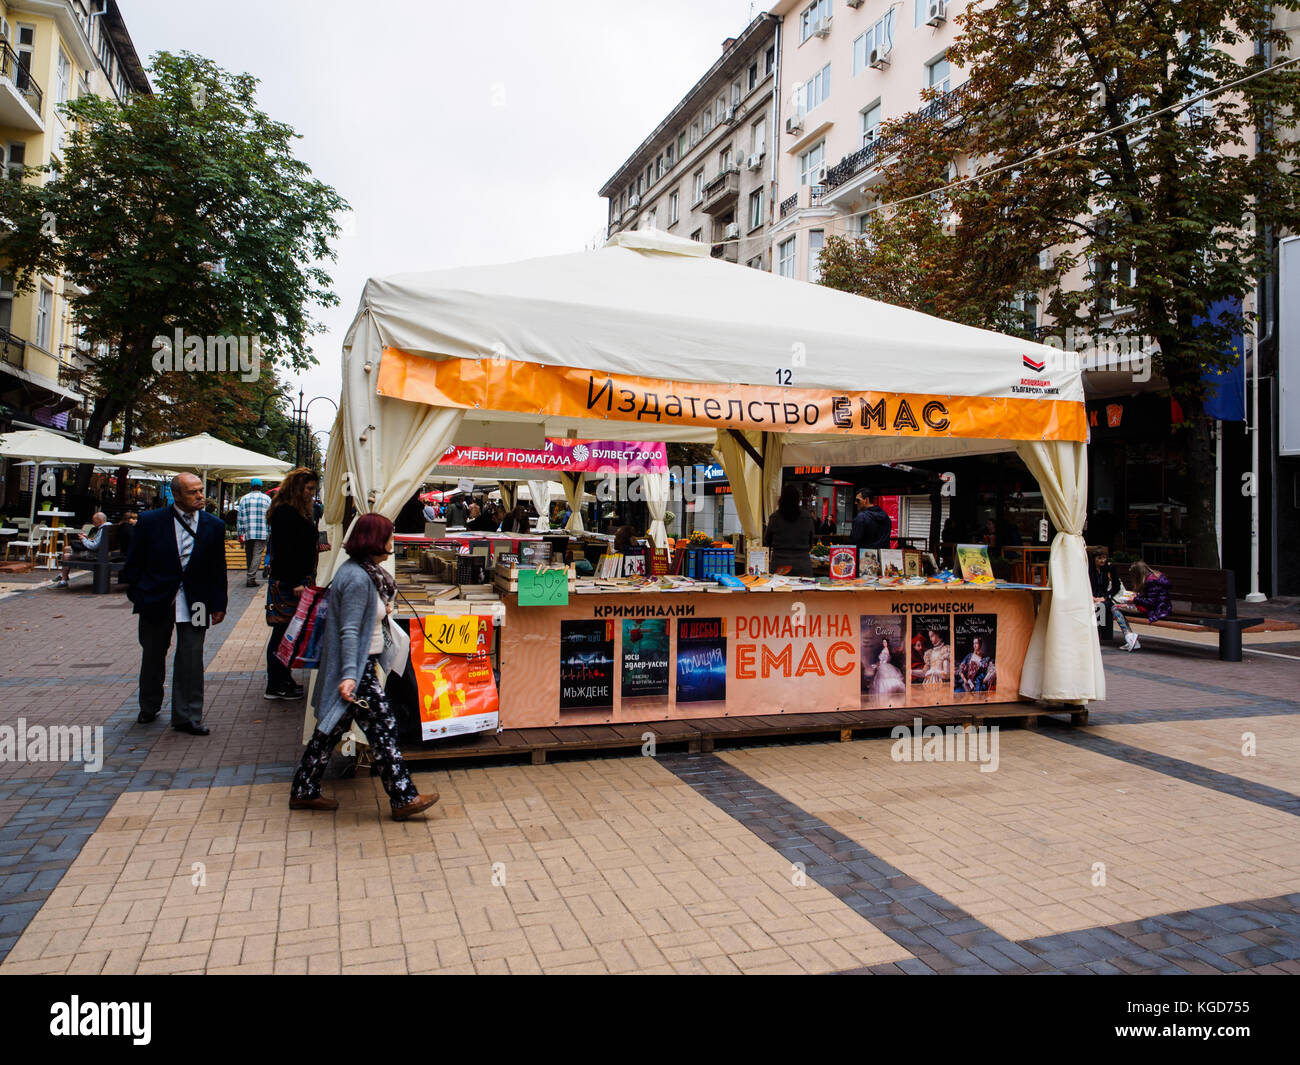 A book shop tent in the middle of Vitoshka walking street, Sofia. Stock Photo